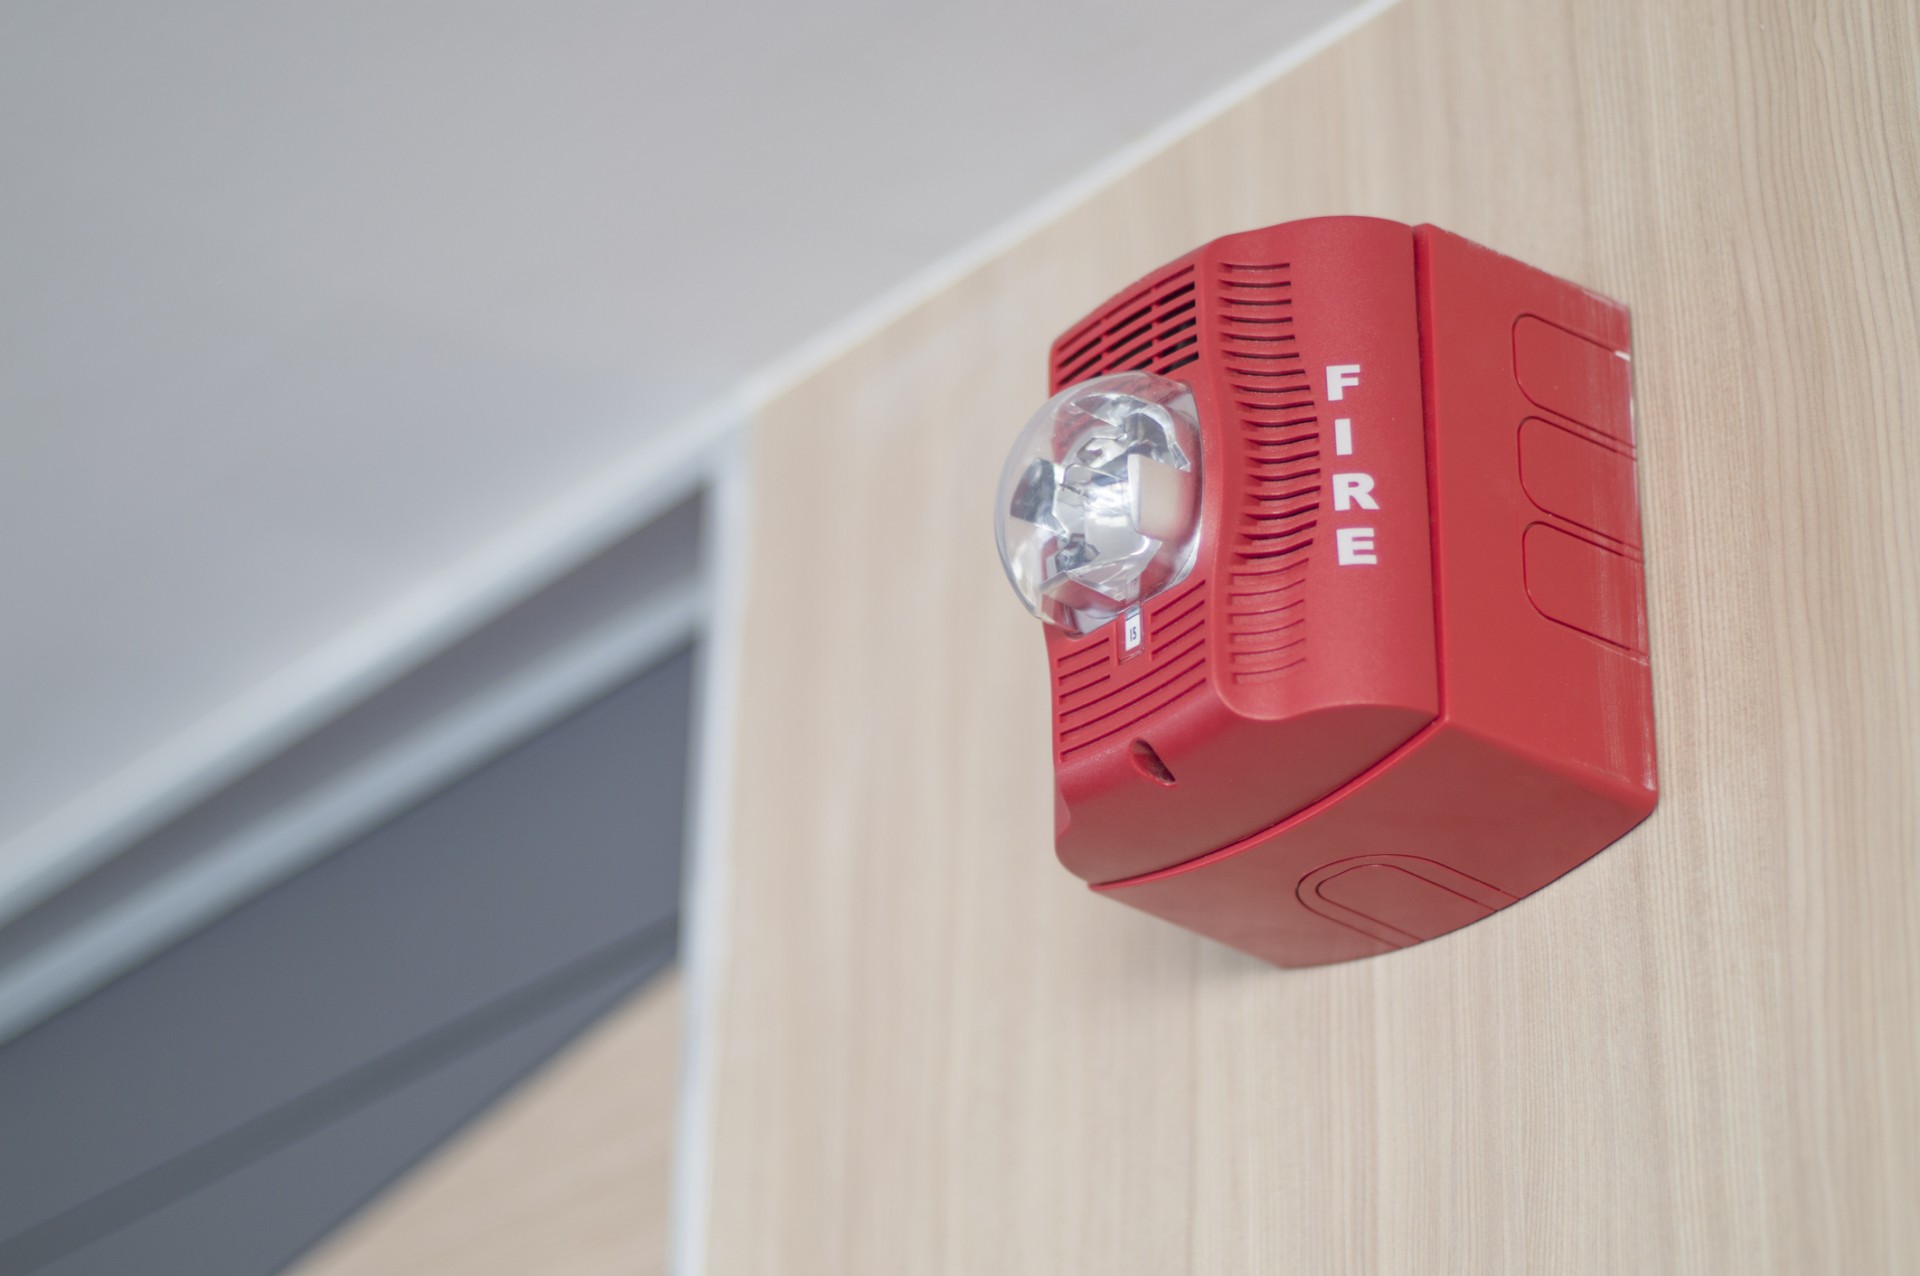 commercial fire alarm system